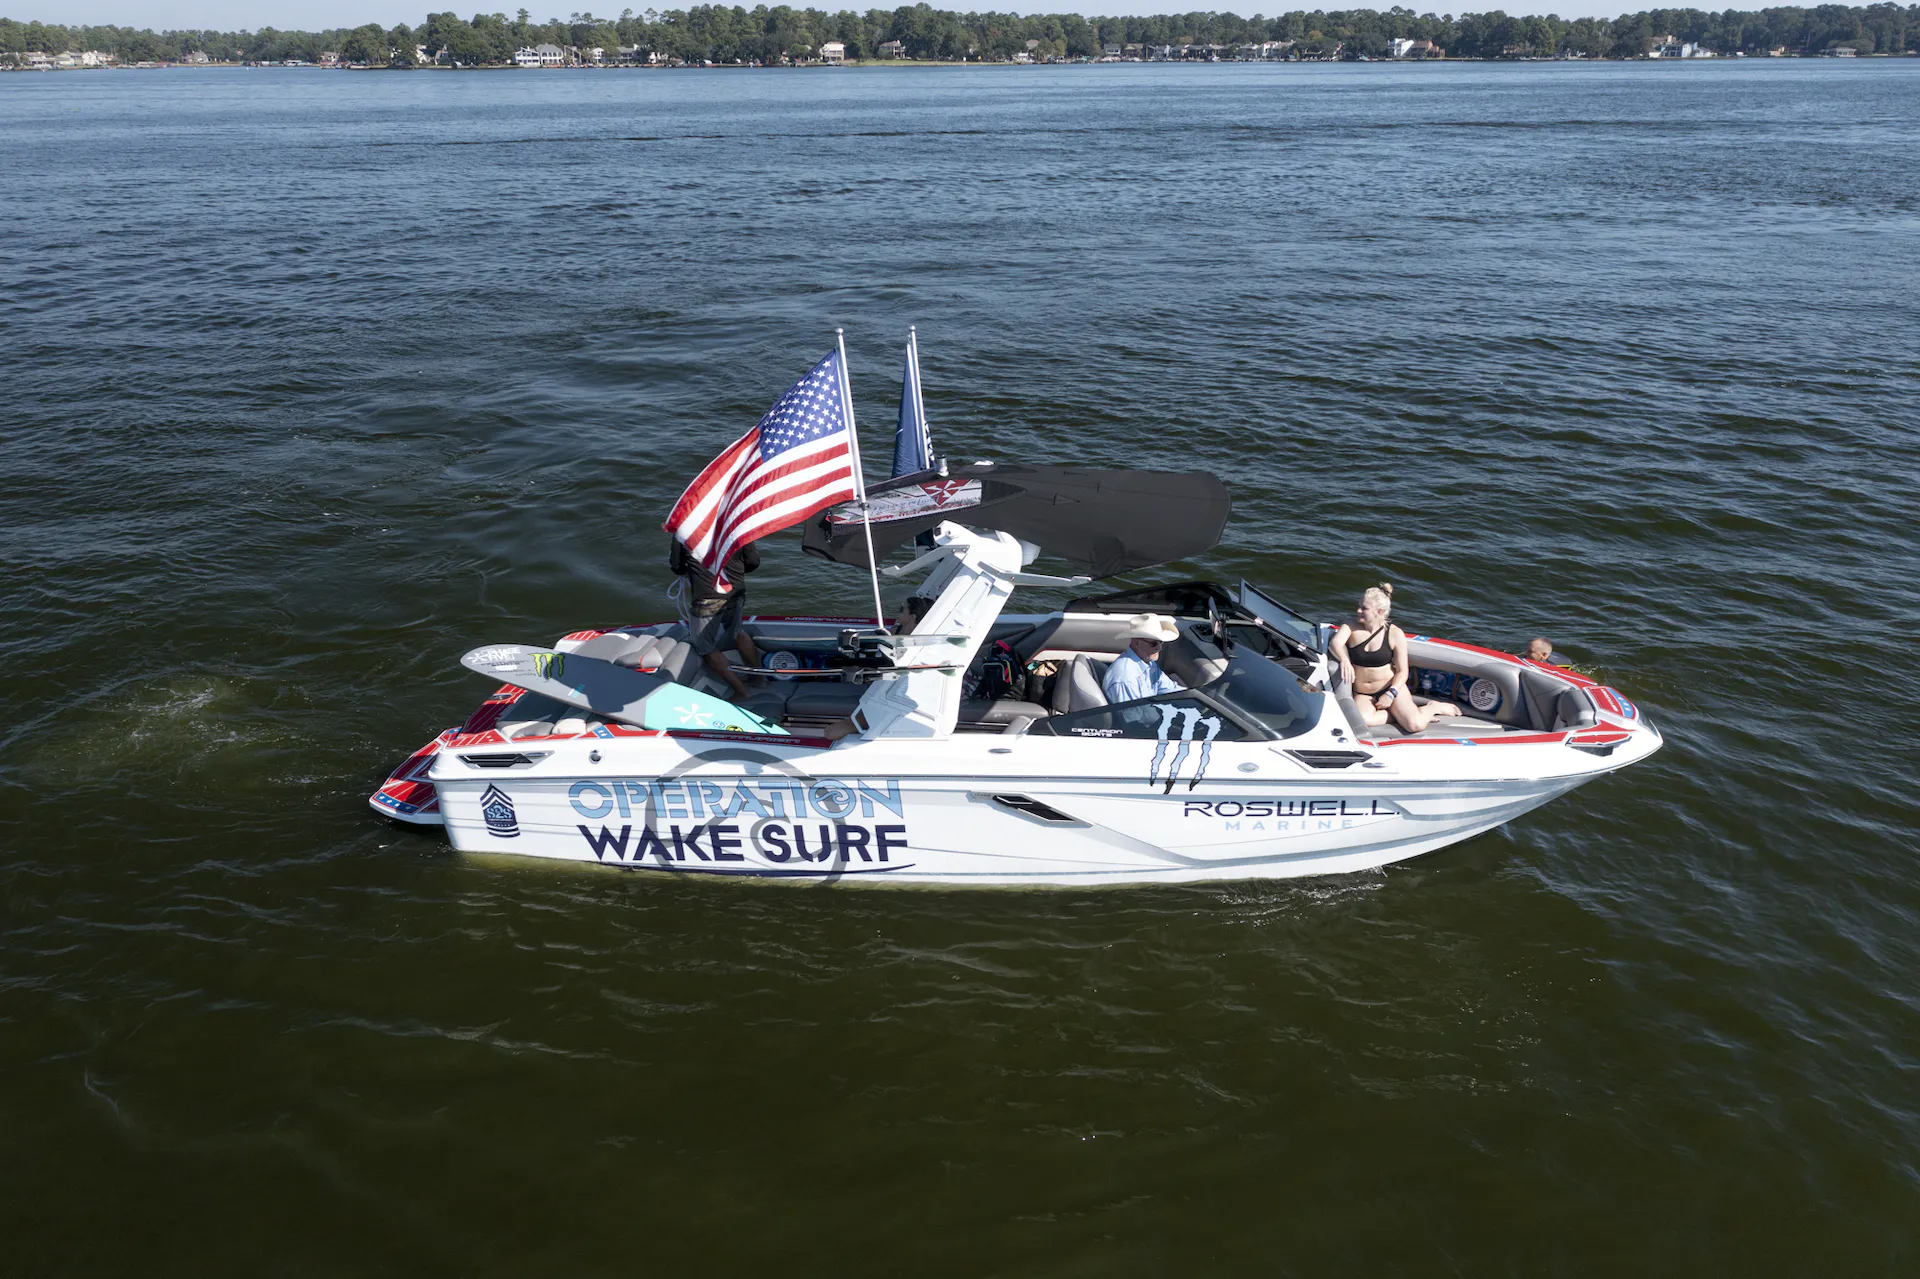 A wakesurf boat with an American flag on it.